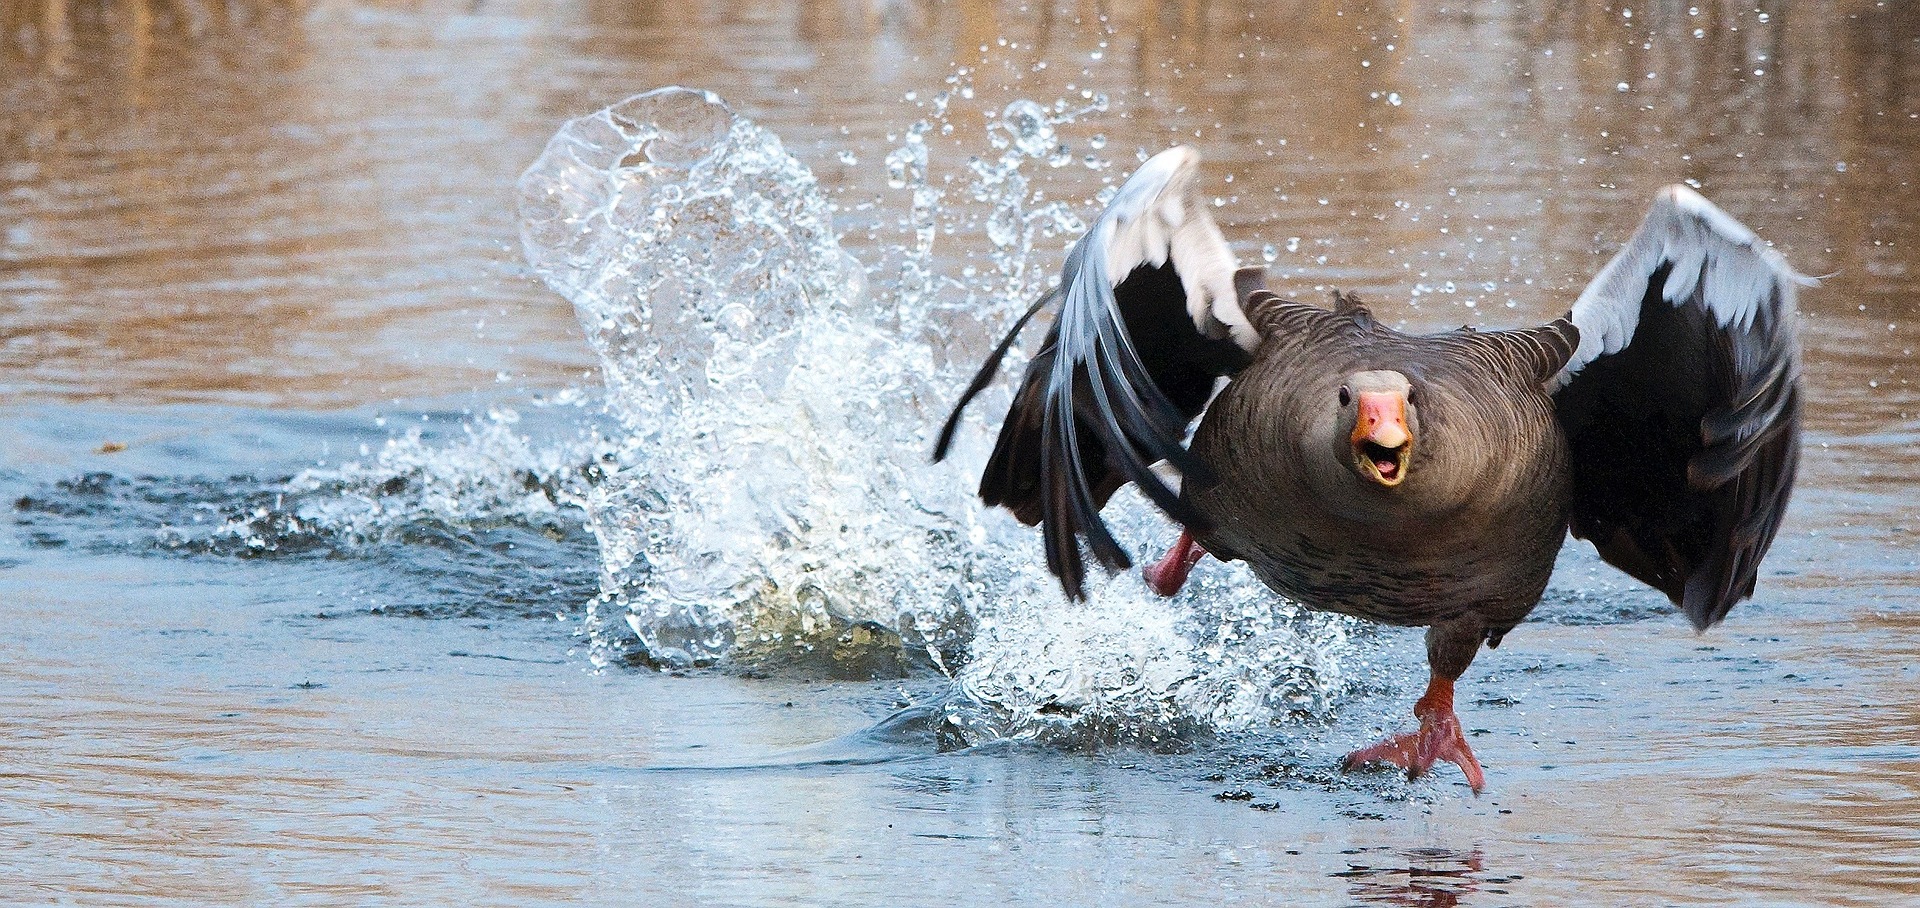 A photo of a greylag goose taking off from water. The goose appears to be coming straight towards the viewer. The photo is very dynamic.